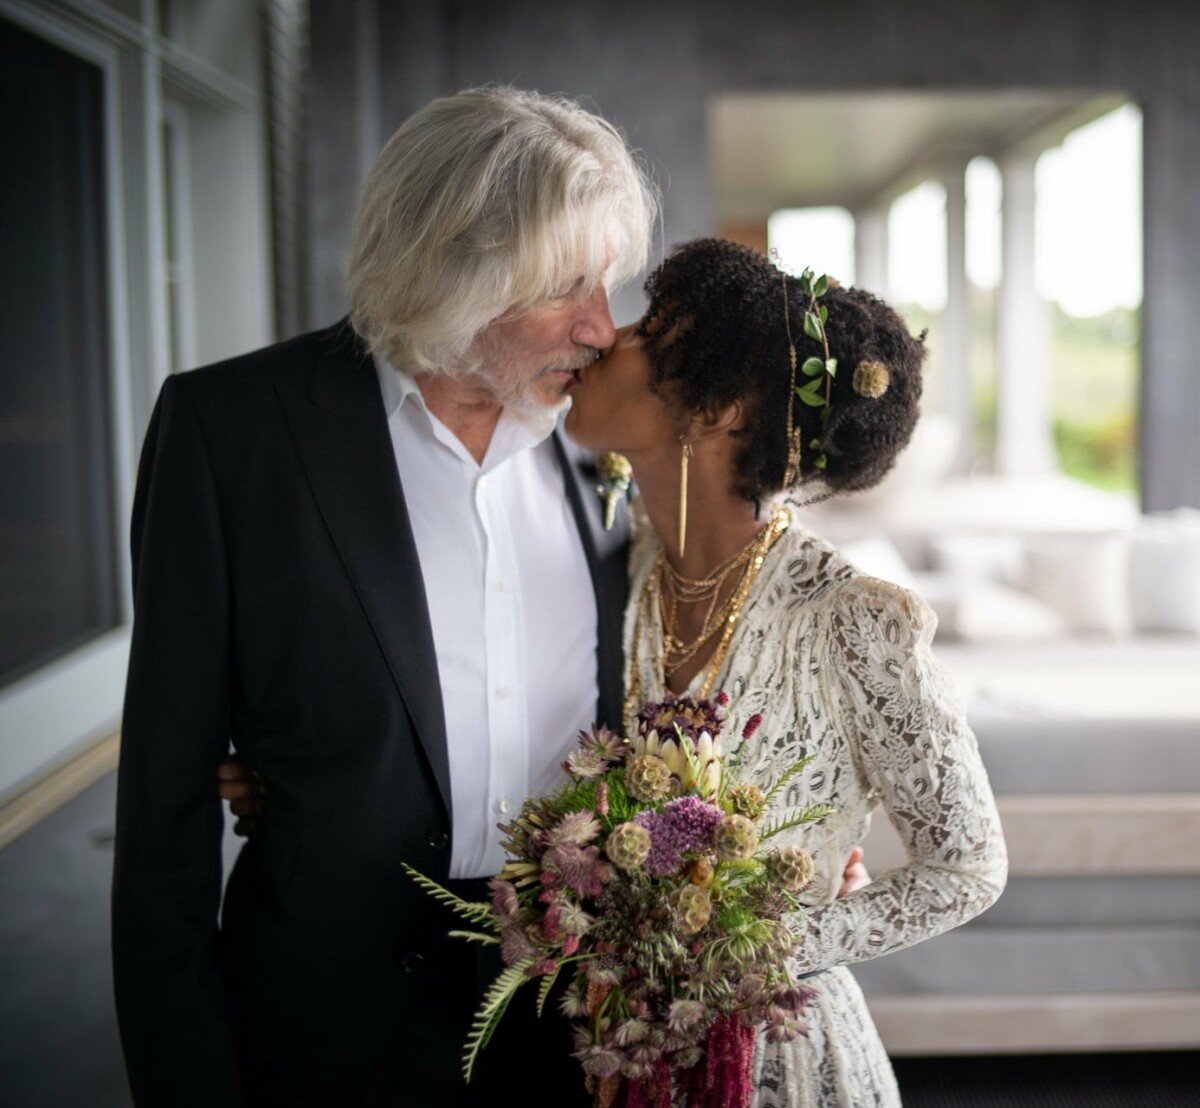 Roger Waters of Pink Floyd, 78, got married for the fifth time and said I will keep this woman picture